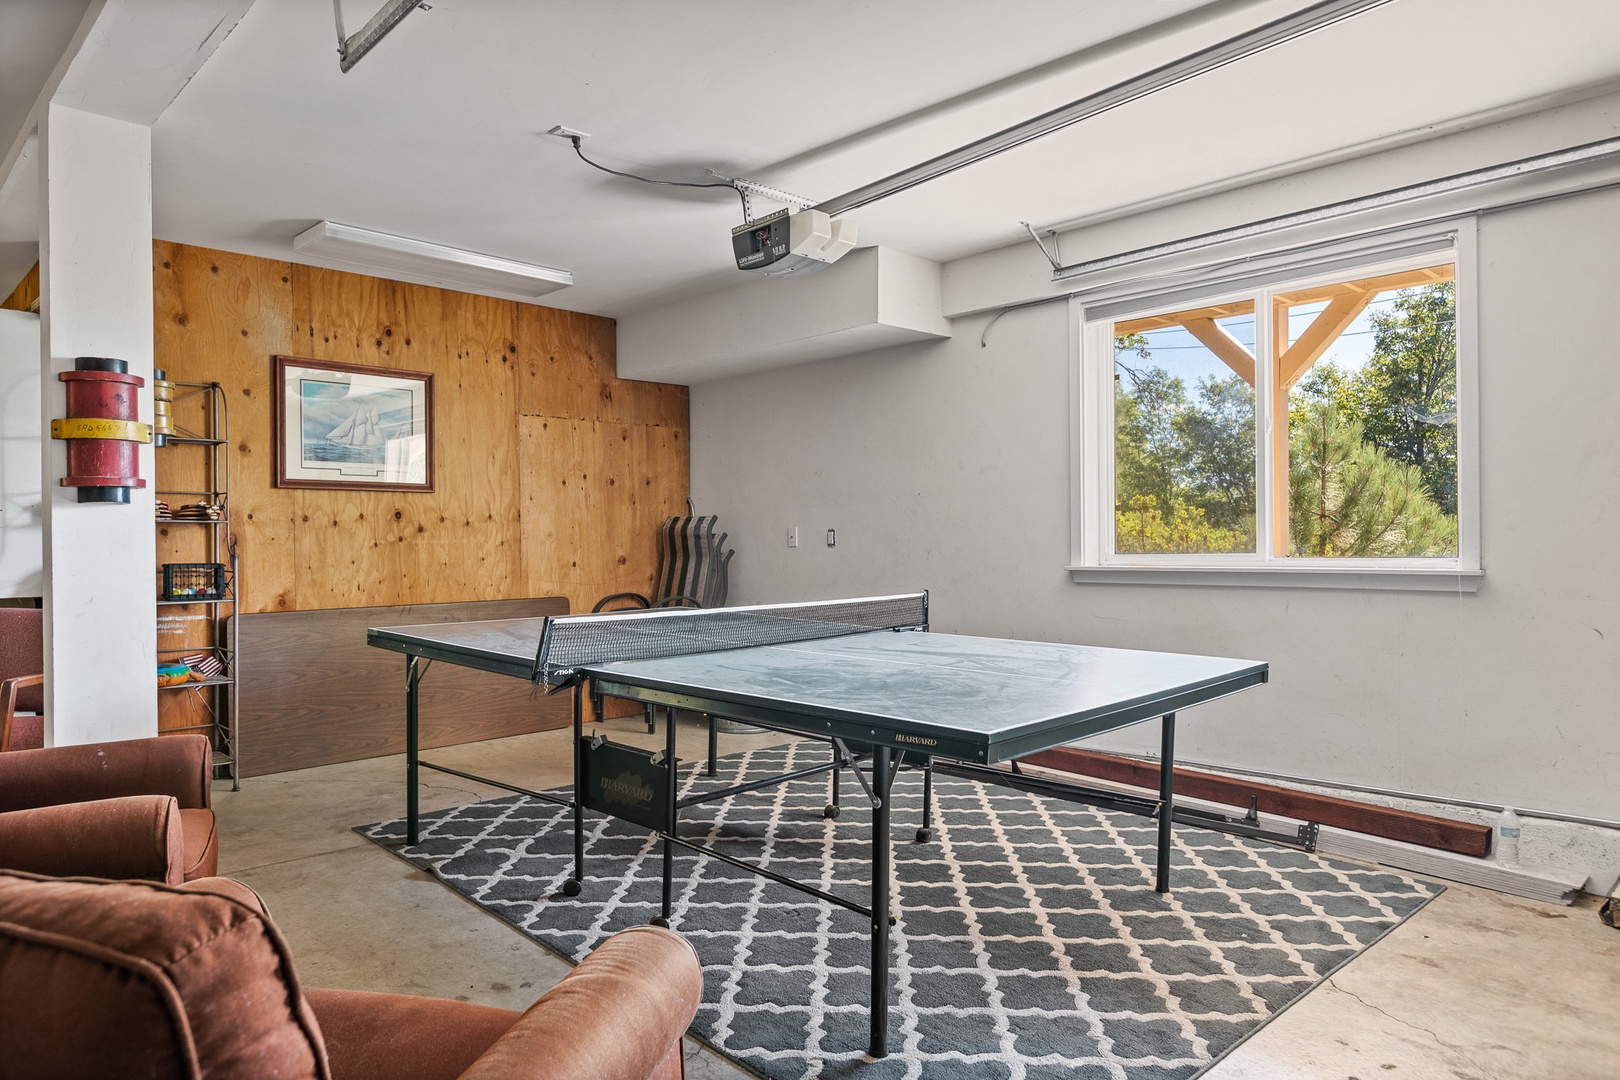 Another game room located in the garage with ping pong